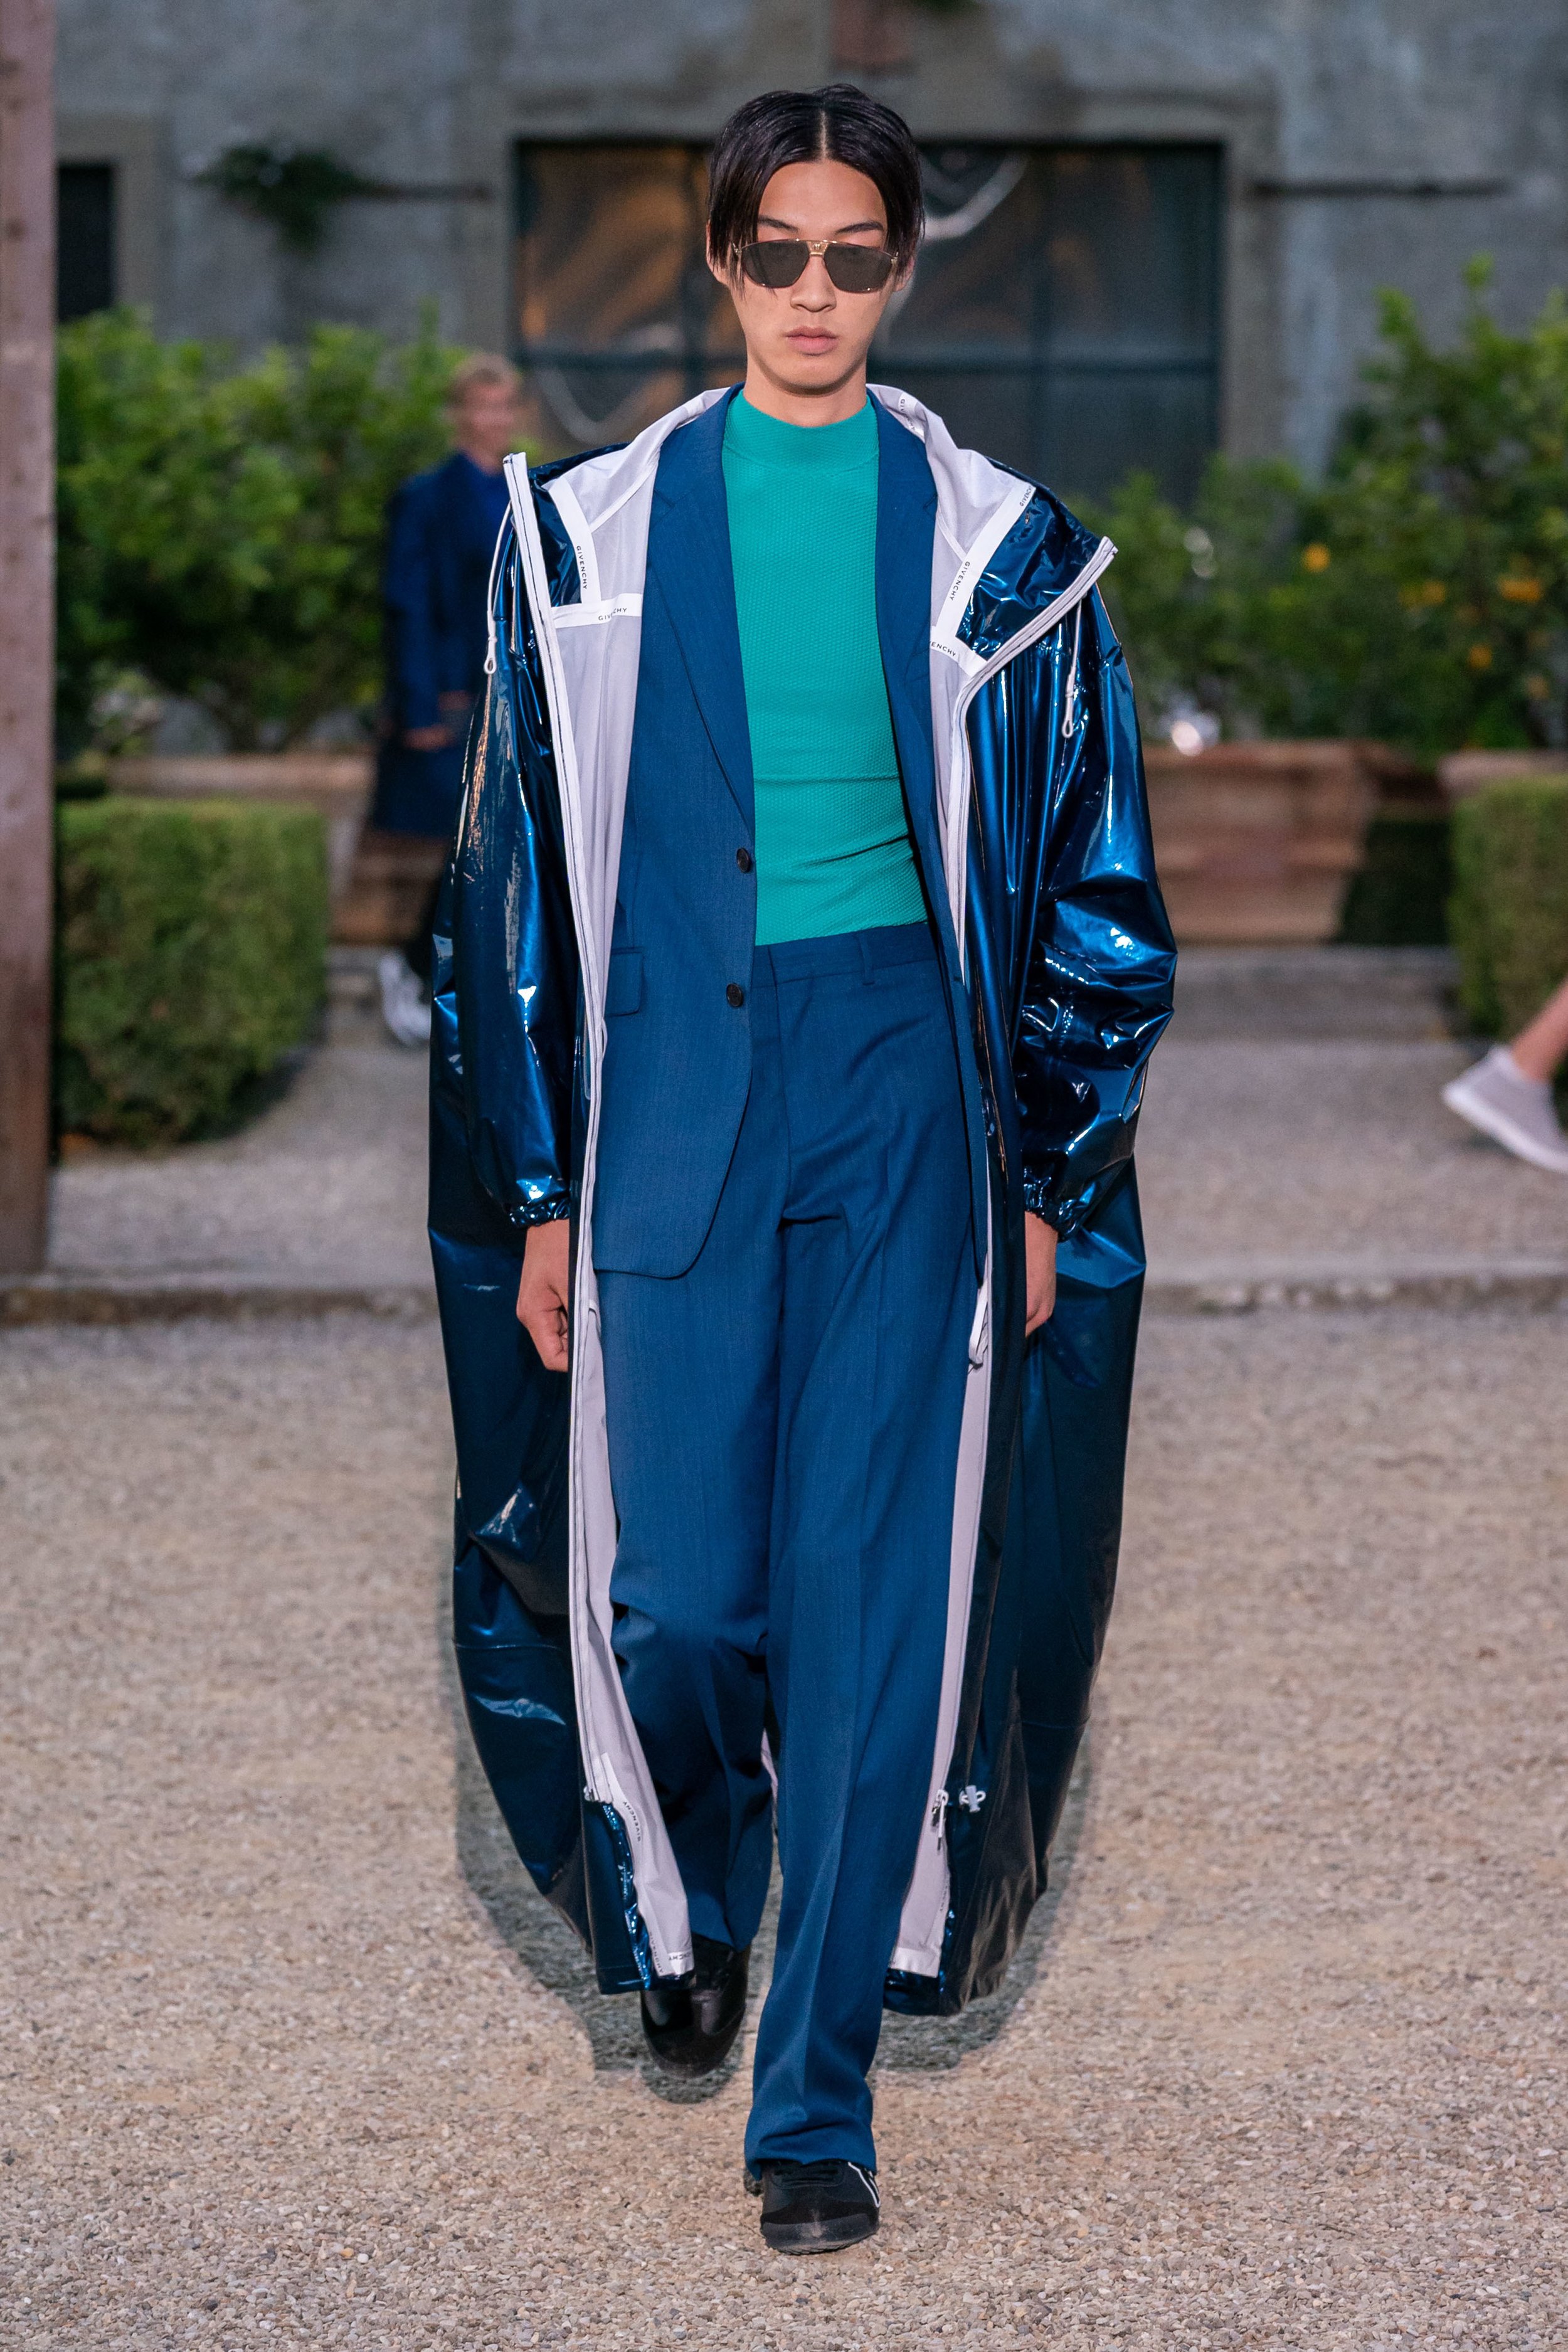 Behind_The_Blinds_Magazine_Givenchy_Men_SS20_Pitti_ALE0173.jpg